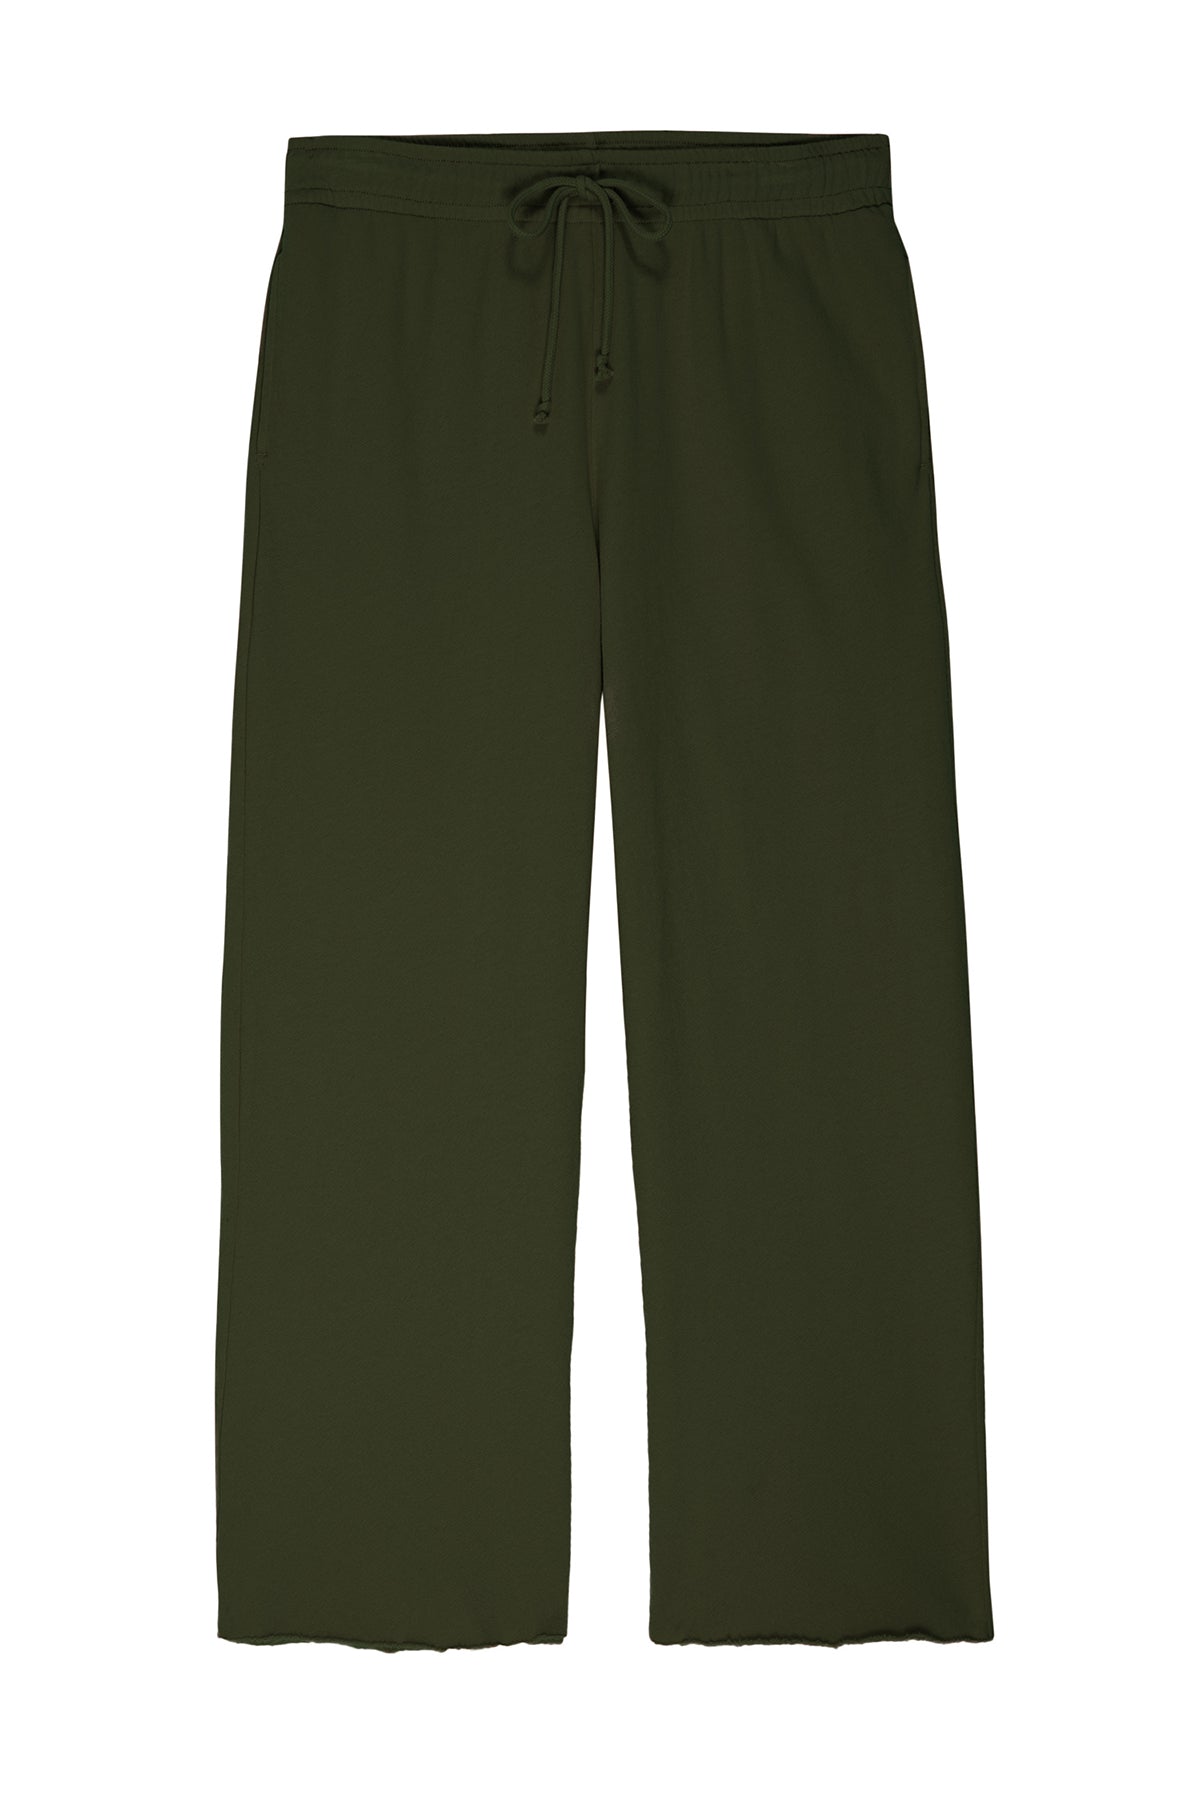 montecito pant dillweed front flat-24351782928577